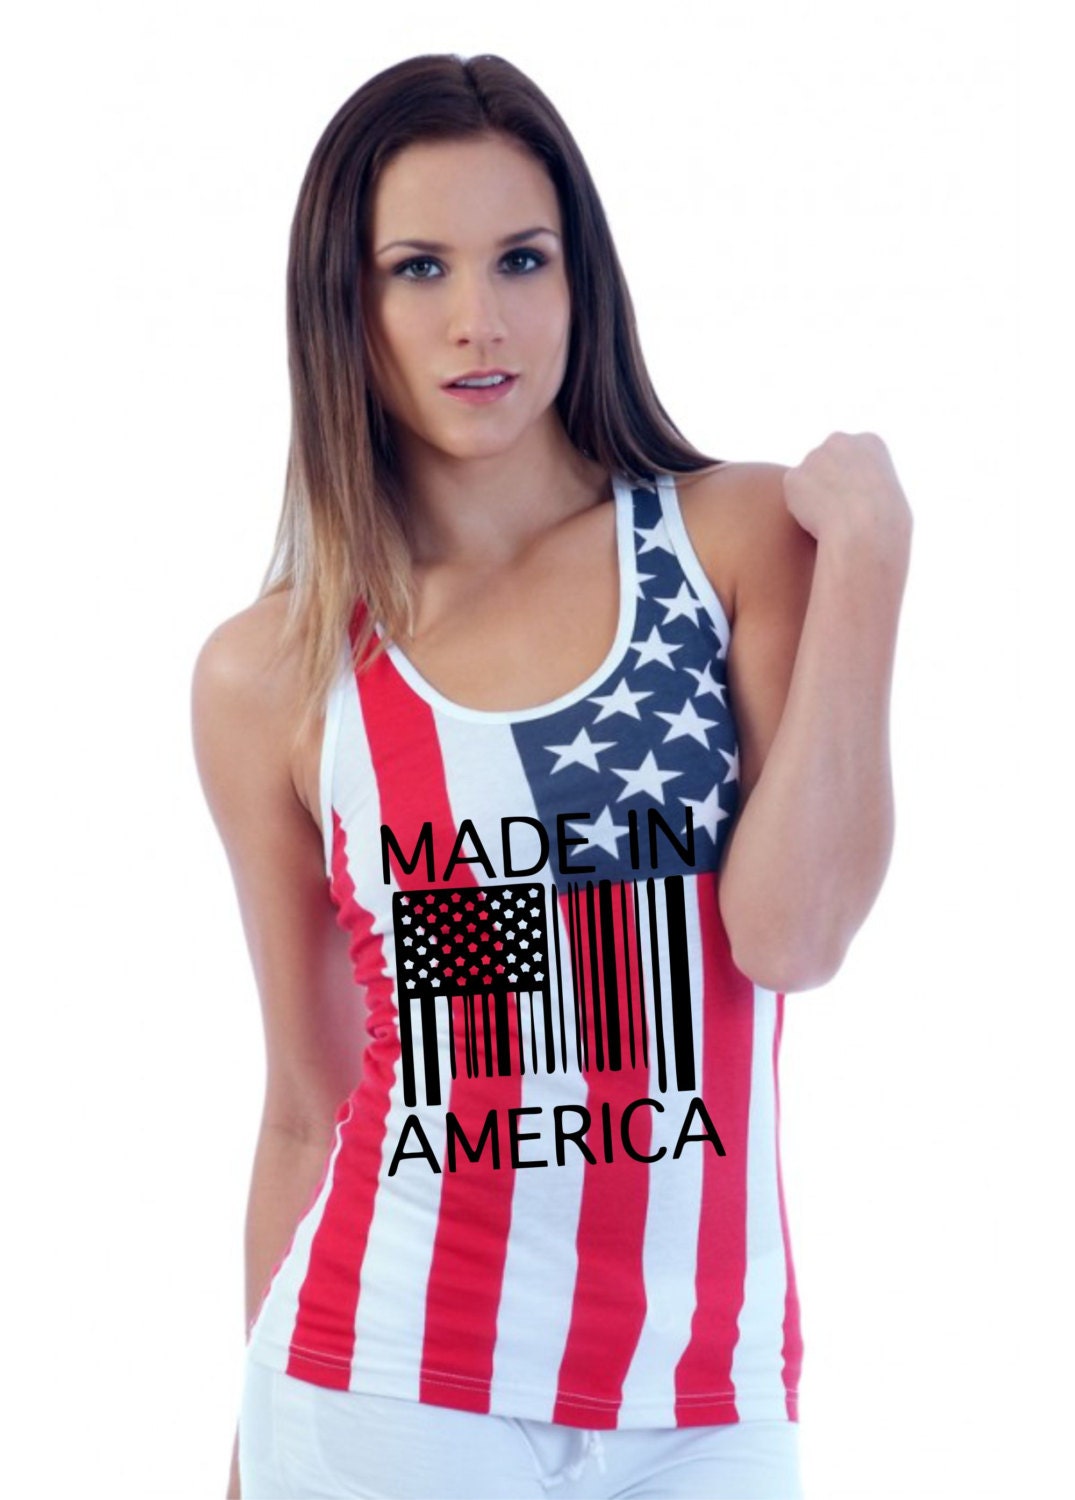 Womens tops made in usa